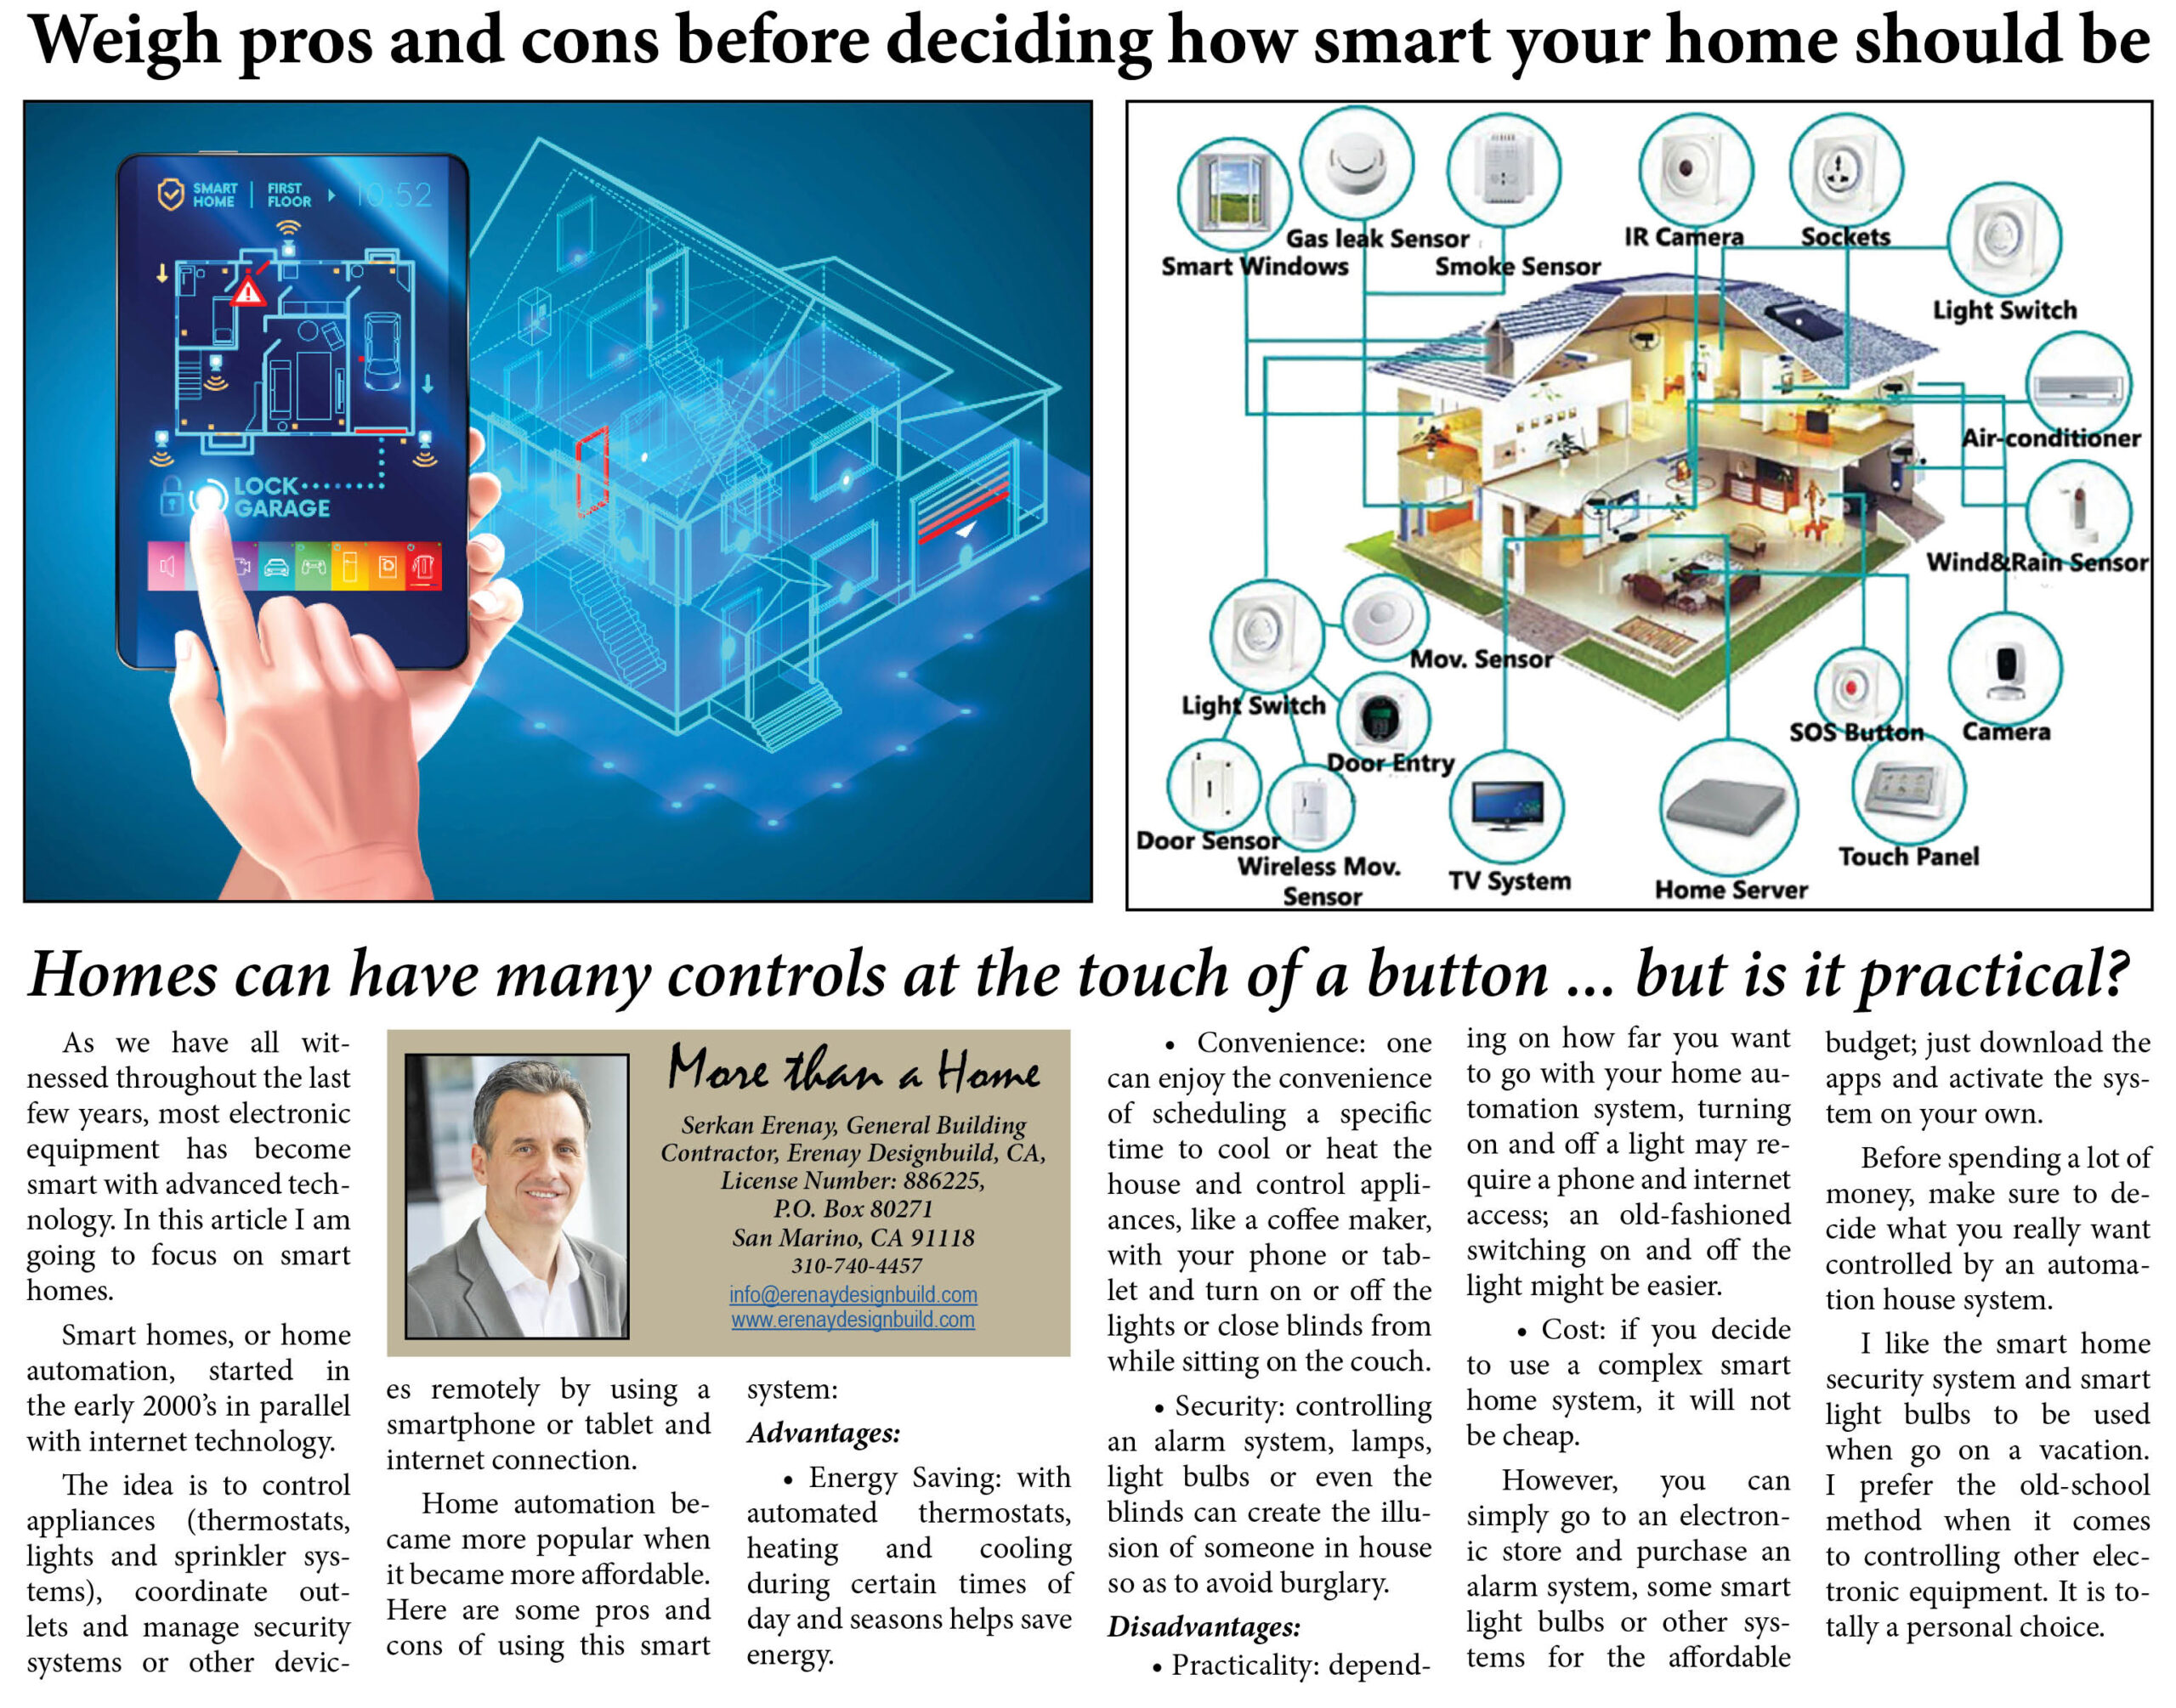 Erenay Design Build weighs pros and cons of the smart home